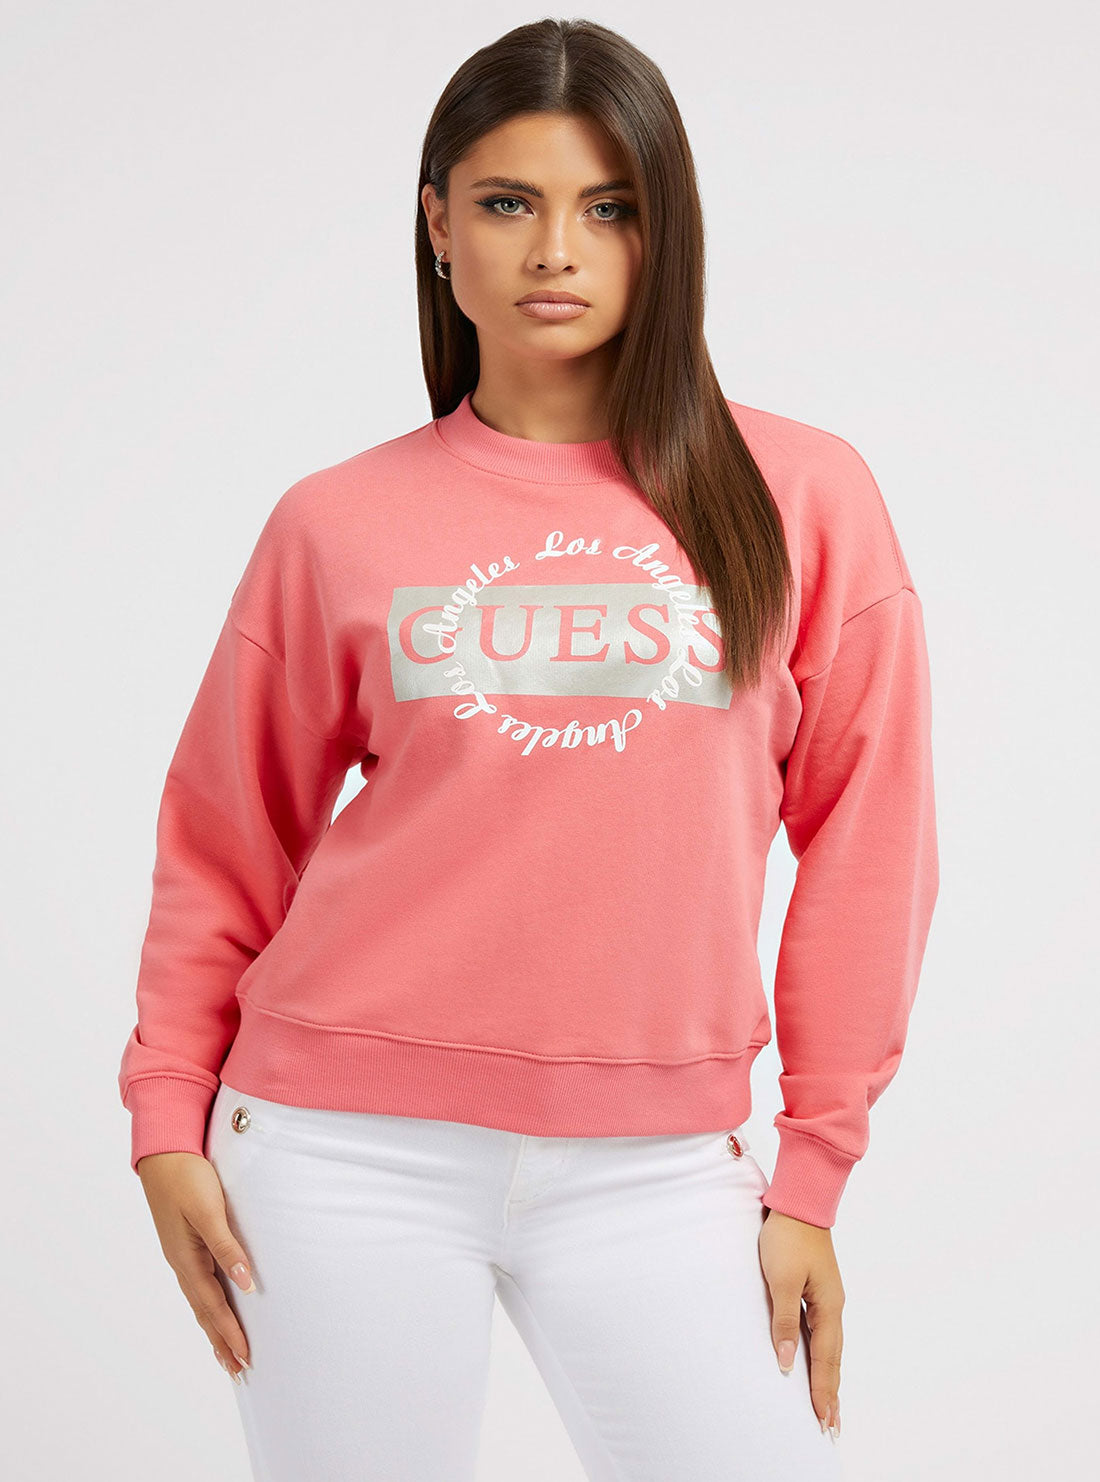 Pink Round Logo Jumper | GUESS Women's Apparel | front view